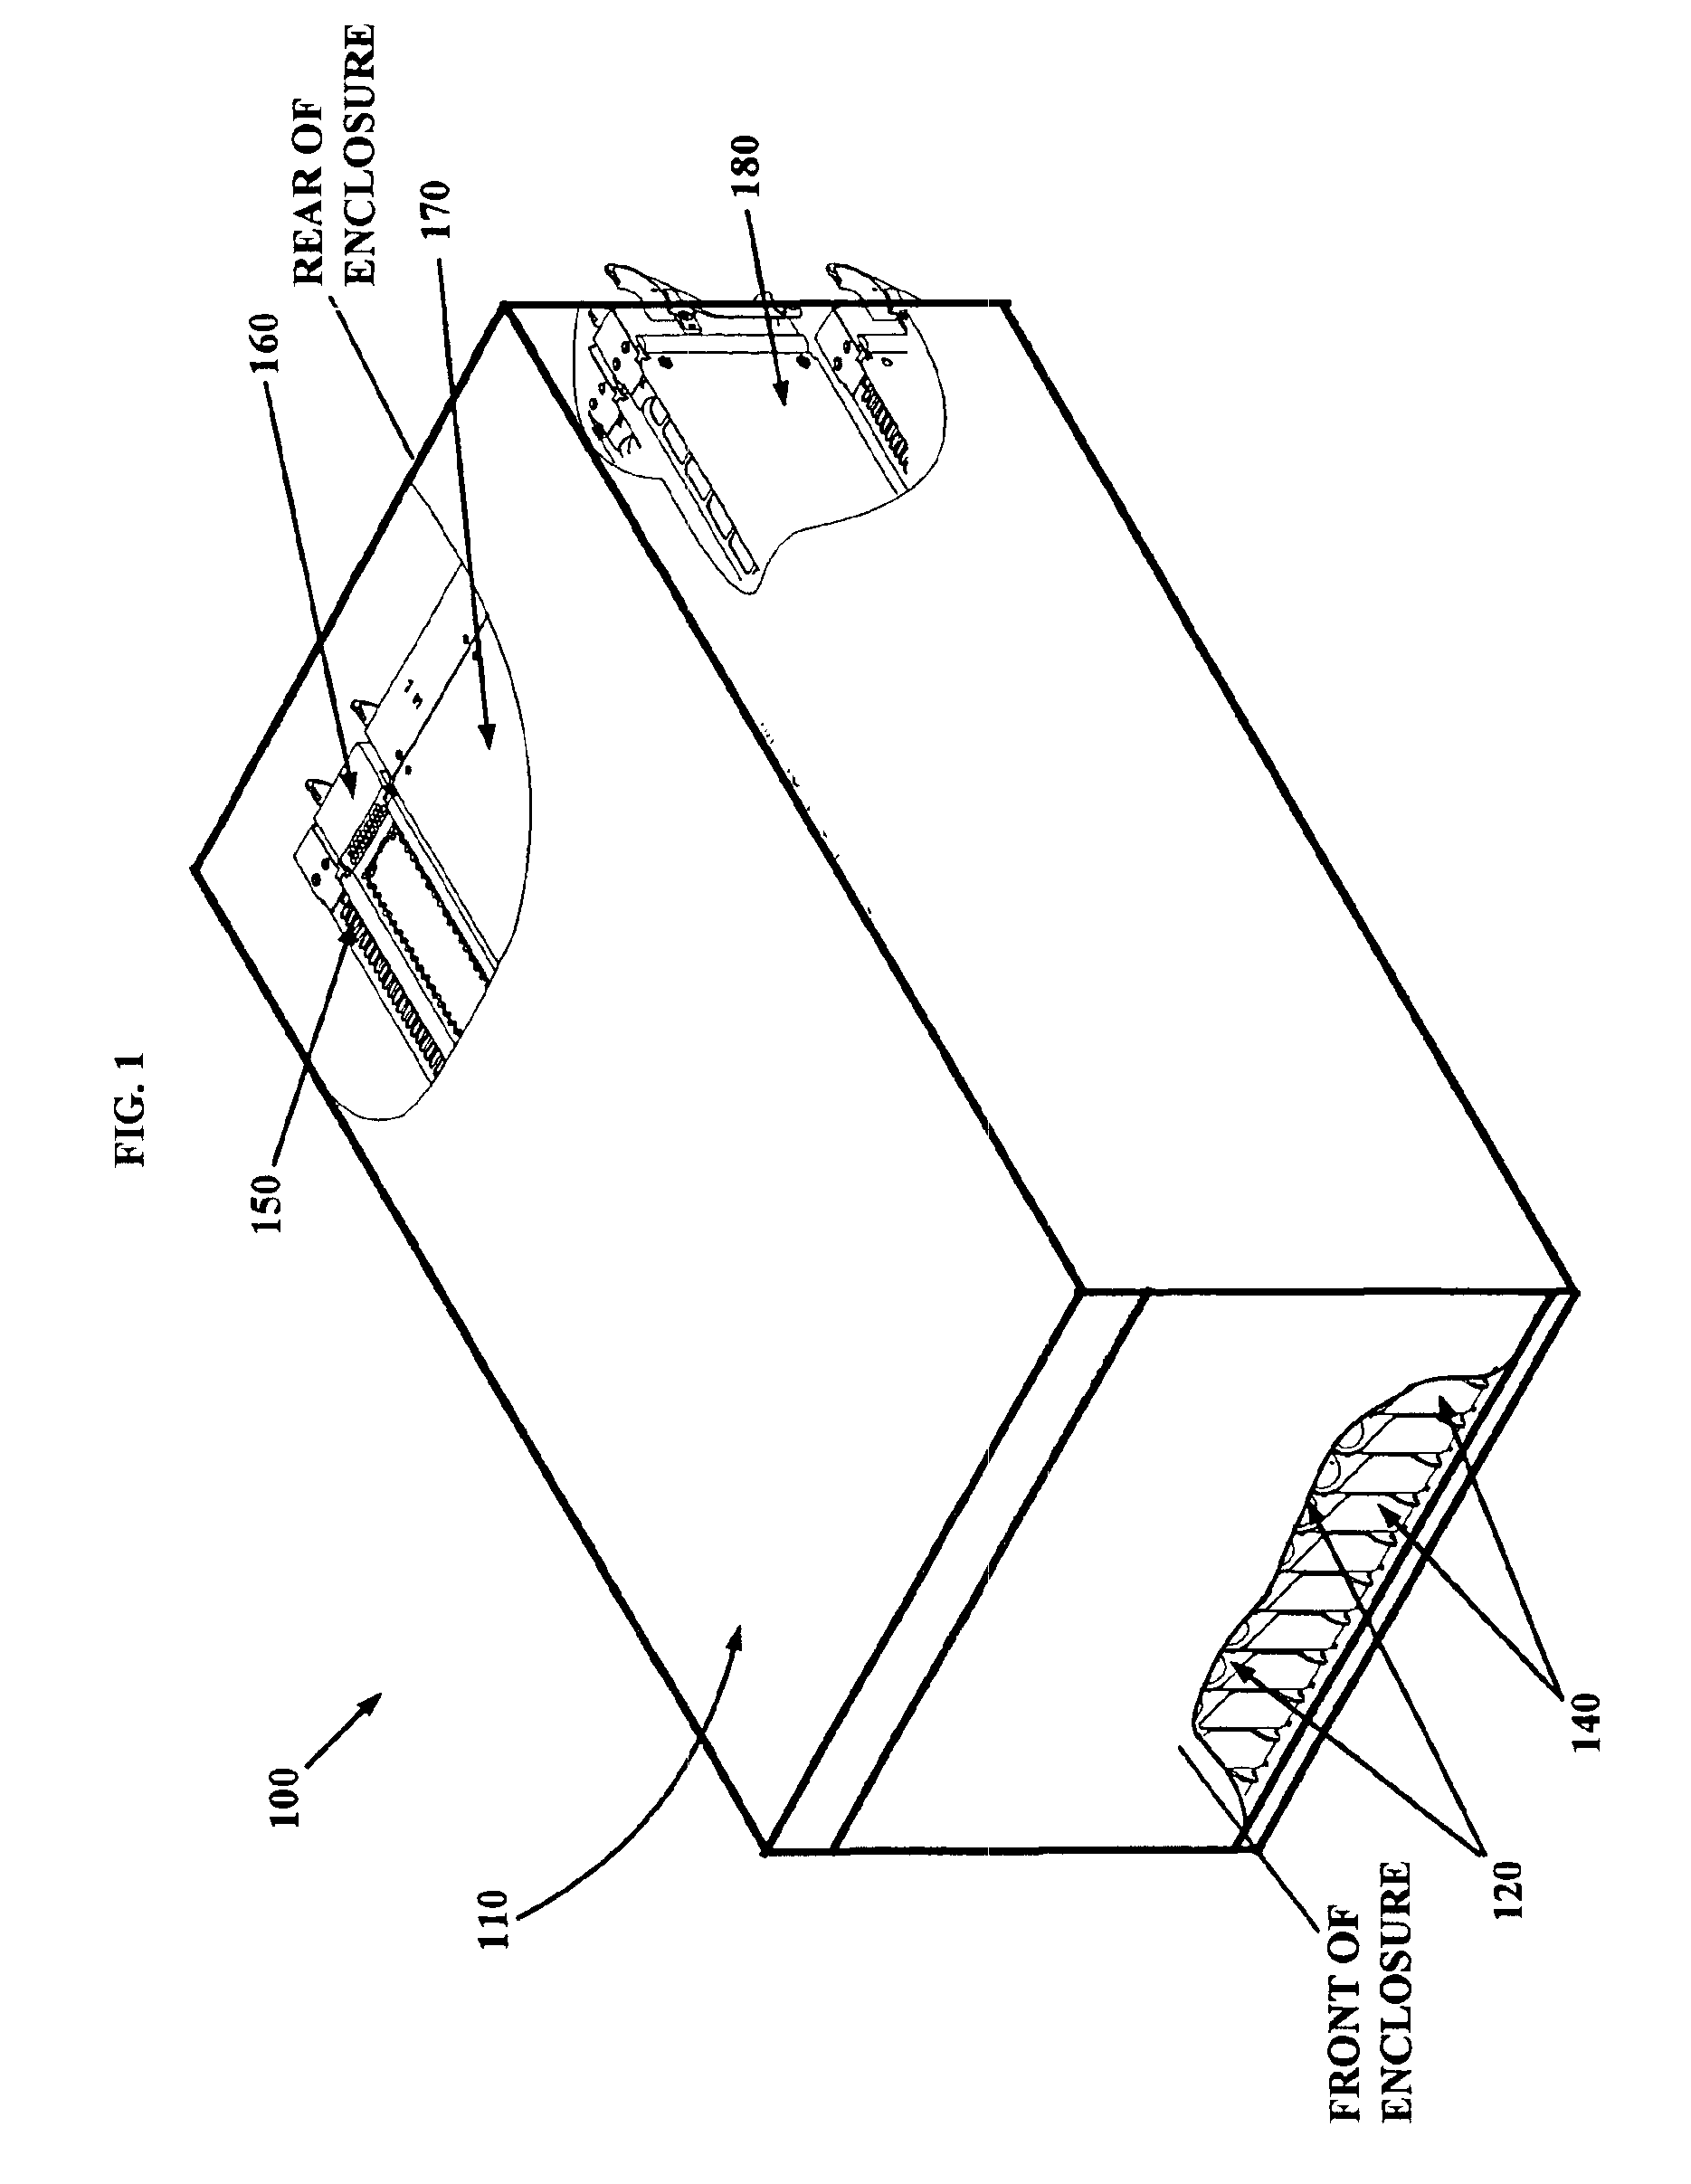 Thermal analysis in a data processing system